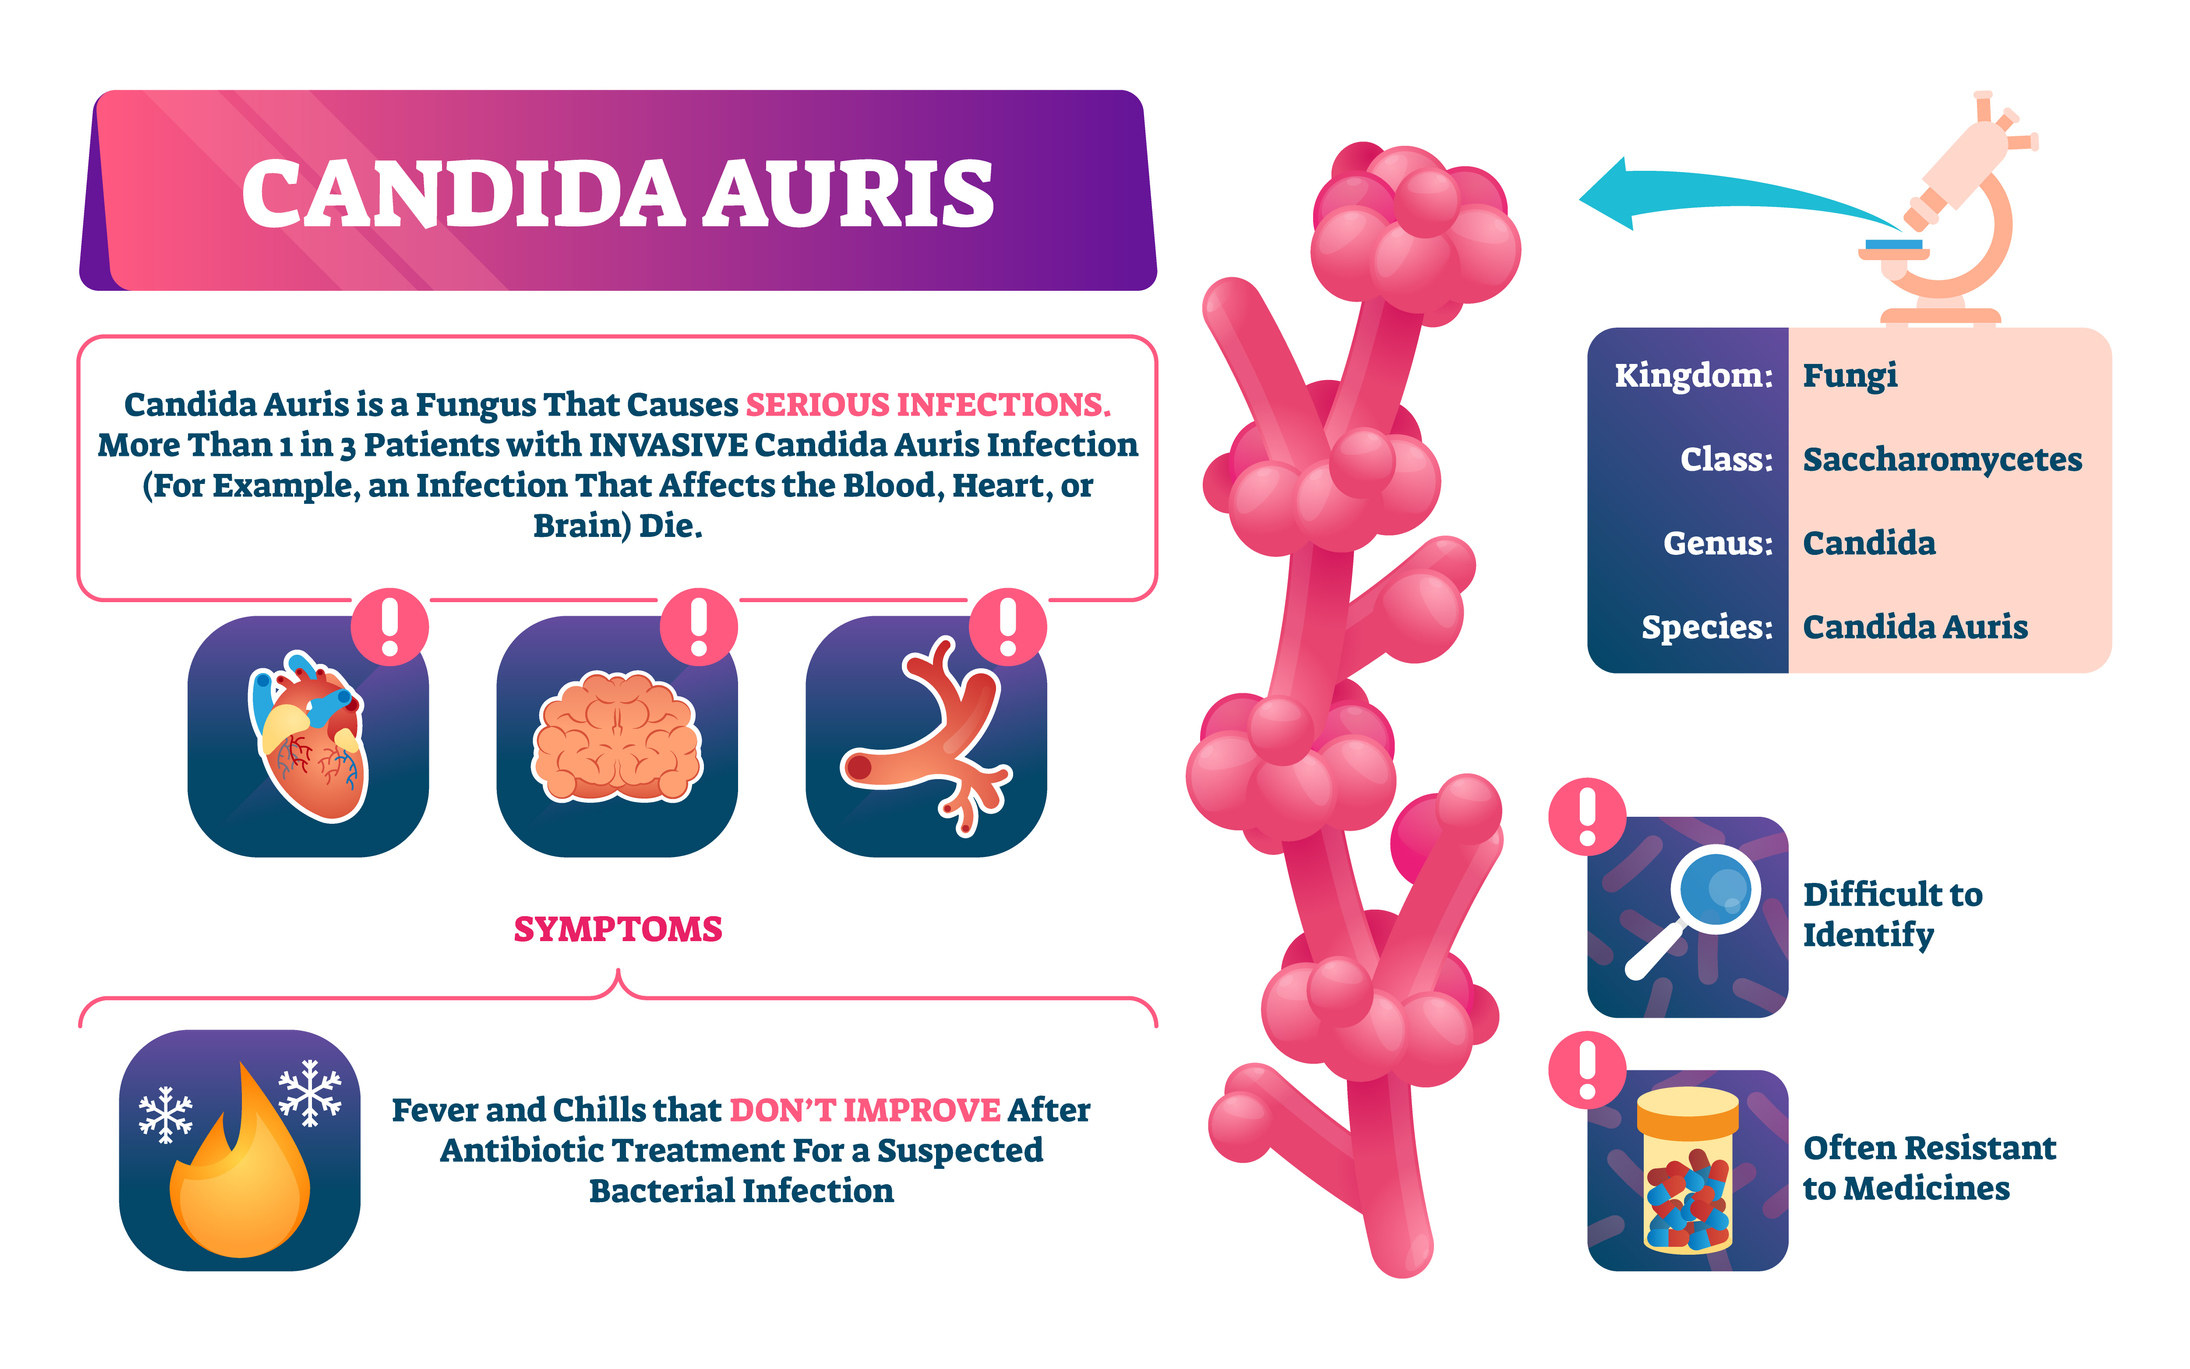 Candida auris vector illustration. Biological fungus infection explanation. Labeled invasive disease symptoms, classification and characteristics. Educational treatment resistant microorganism scheme.